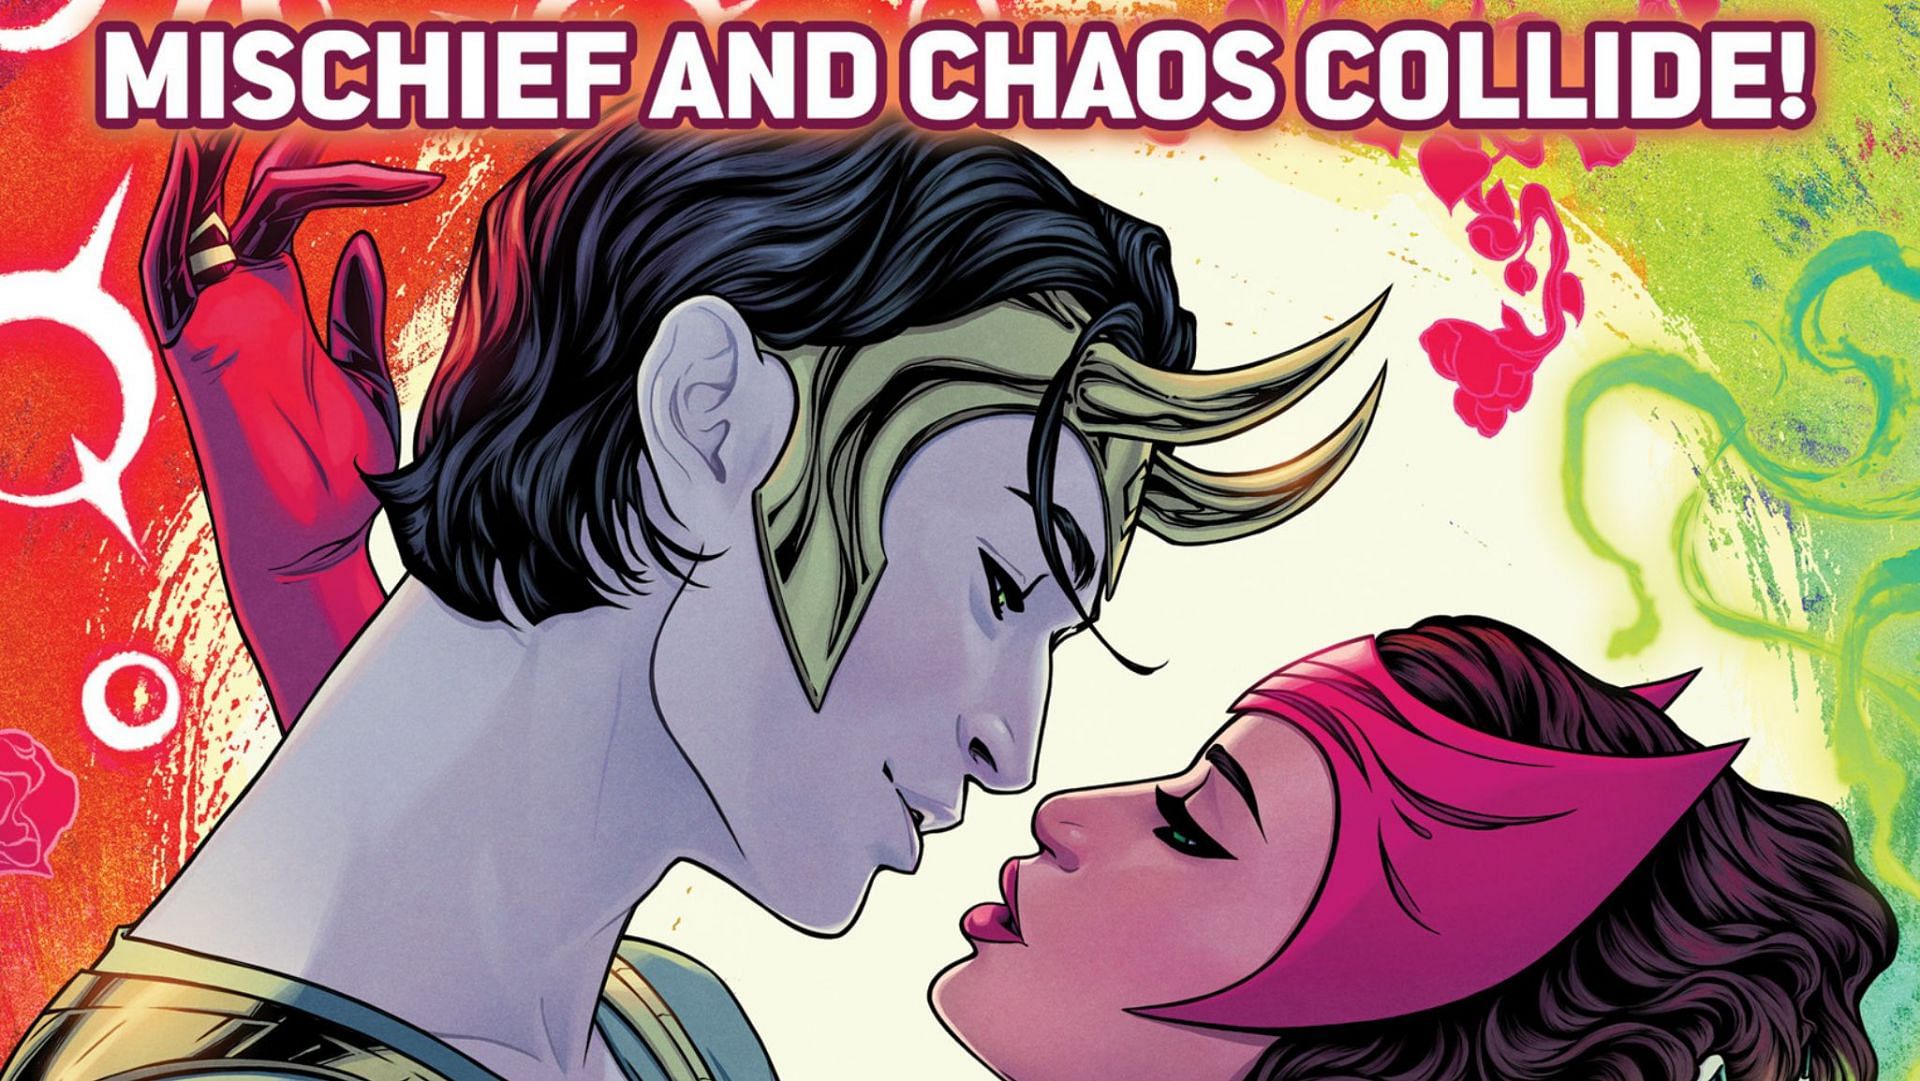 Marvel hints at a romantic twist between Loki and Scarlet Witch